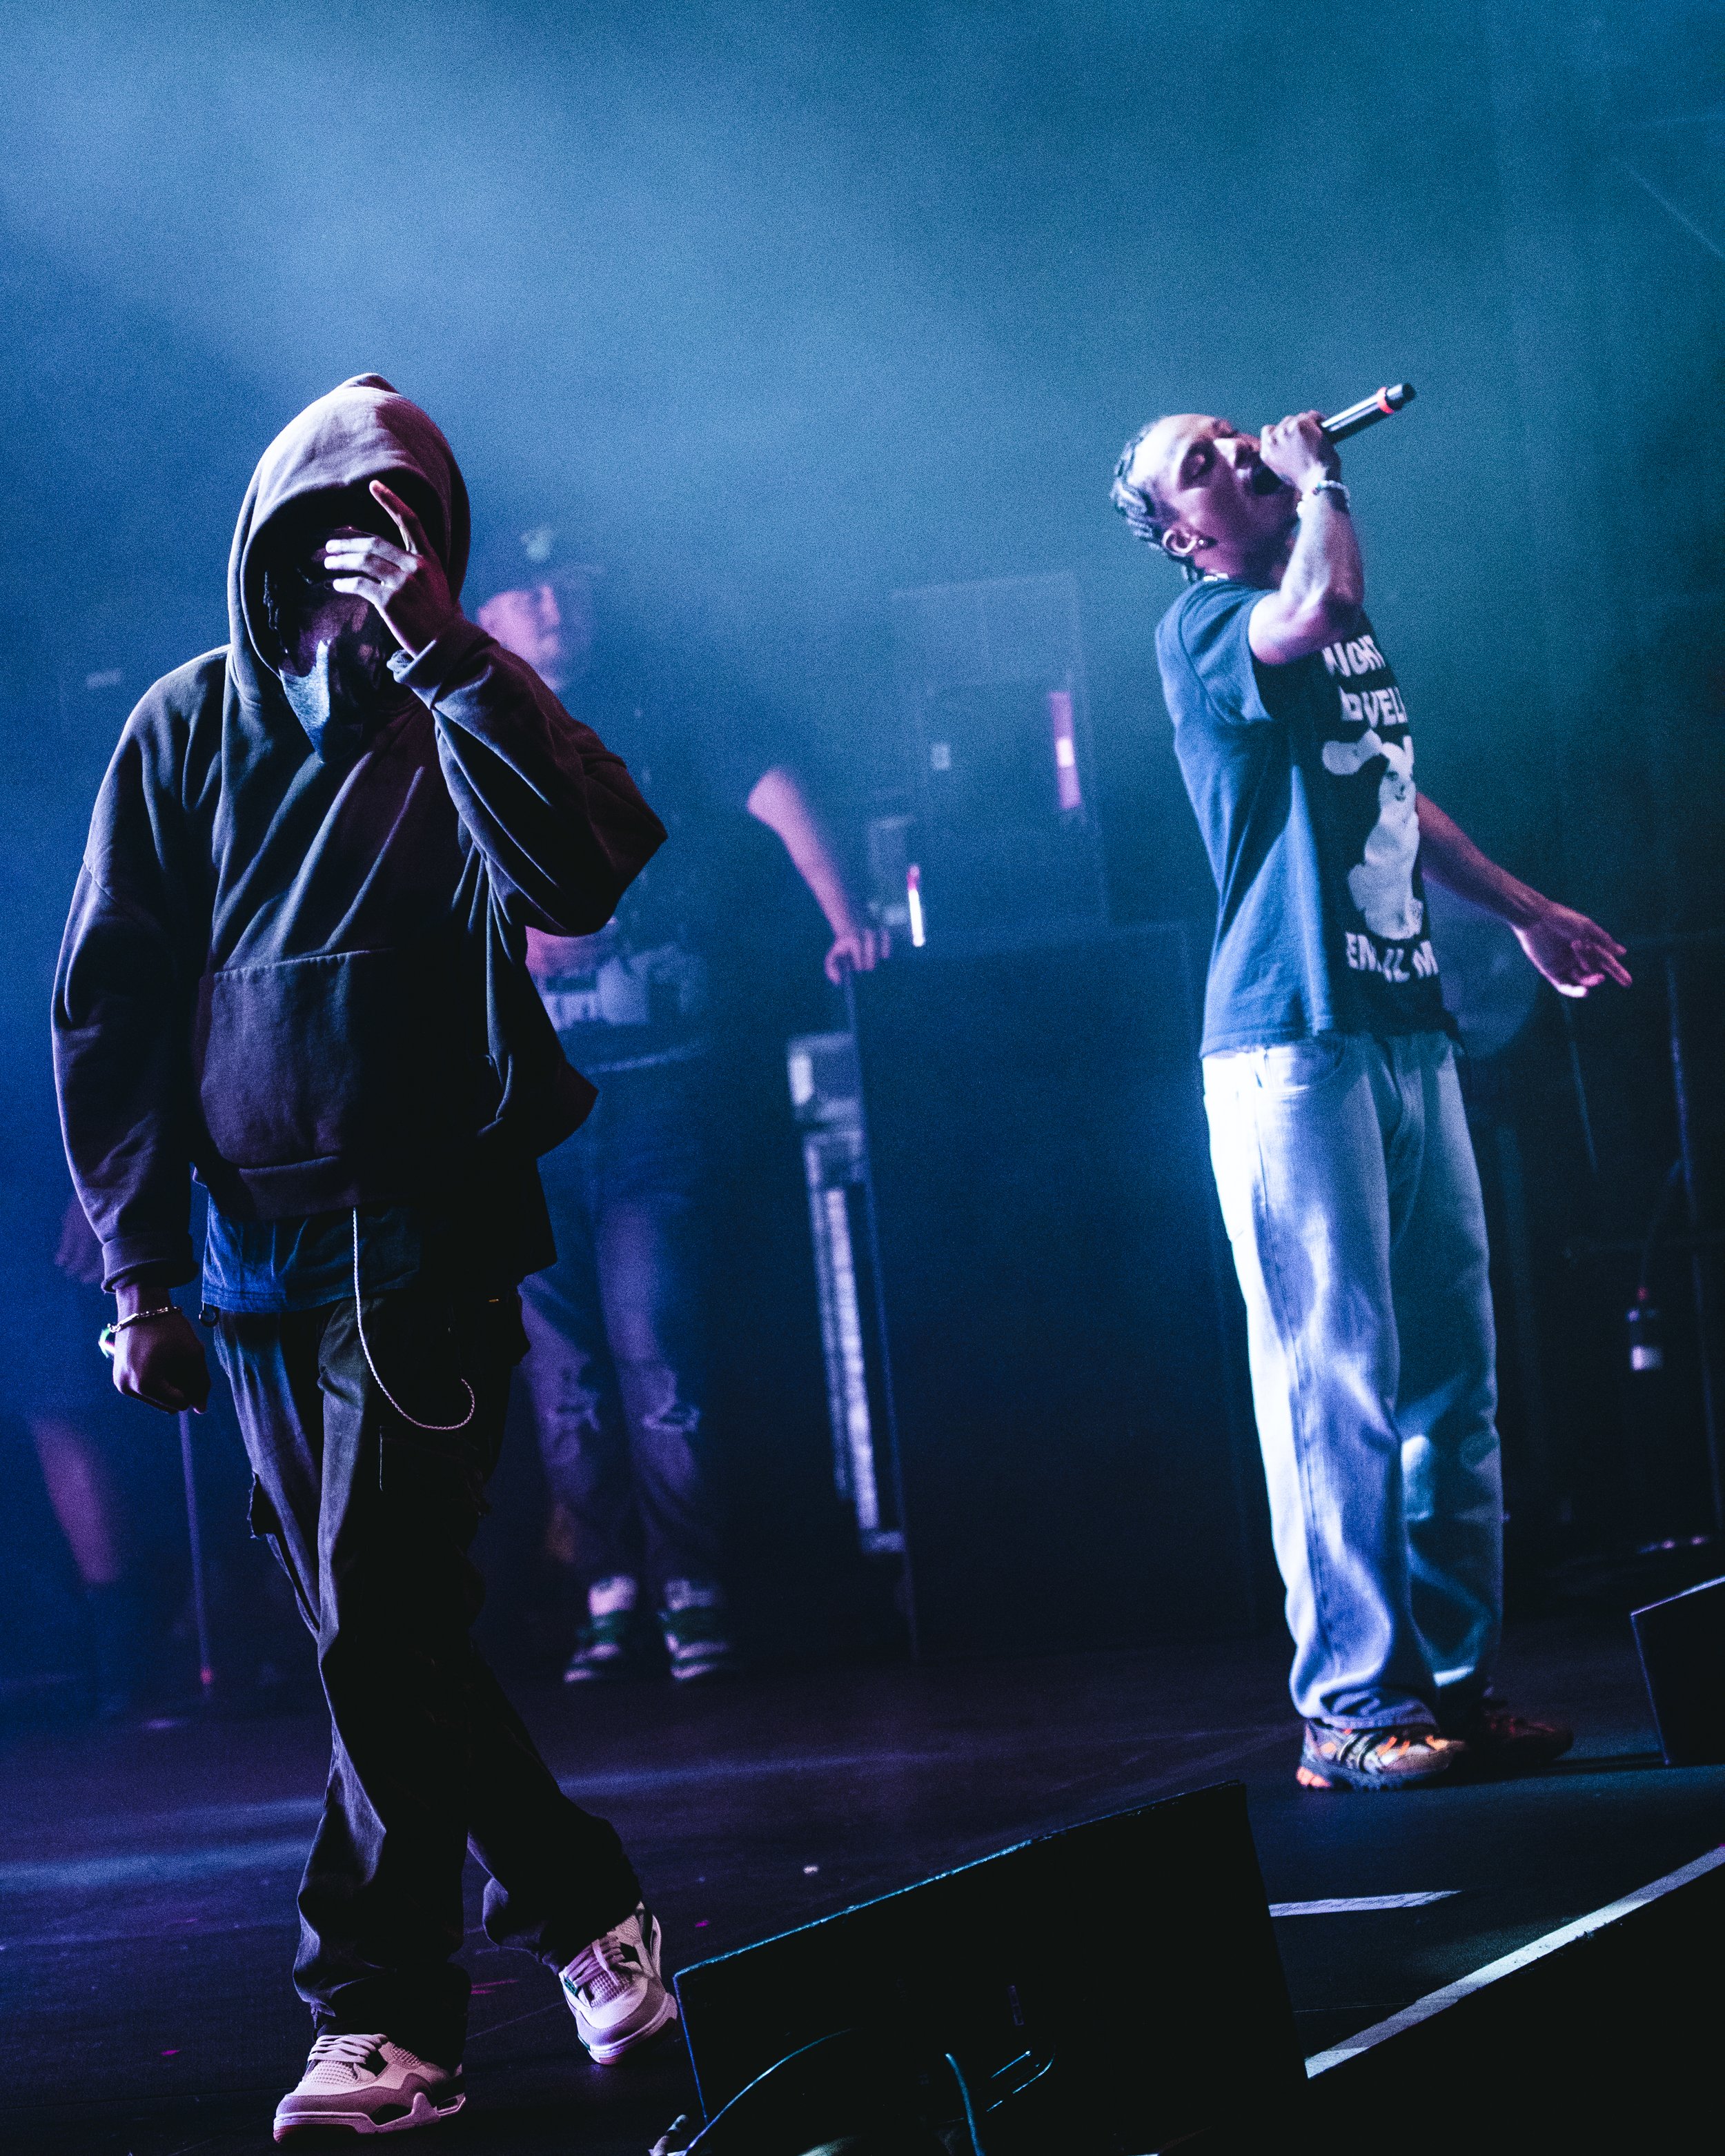 $not, Night Lovell, Eem Triplin, Dc The Don -  GET BUSY OR DIE NORTH AMERICAN TOUR 2023 - Fillmore Auditorium - Denver, Colorado - Monday, May 29, 2023 - PHOTO BY Mowgli Miles of Interracial Friends-52.JPG